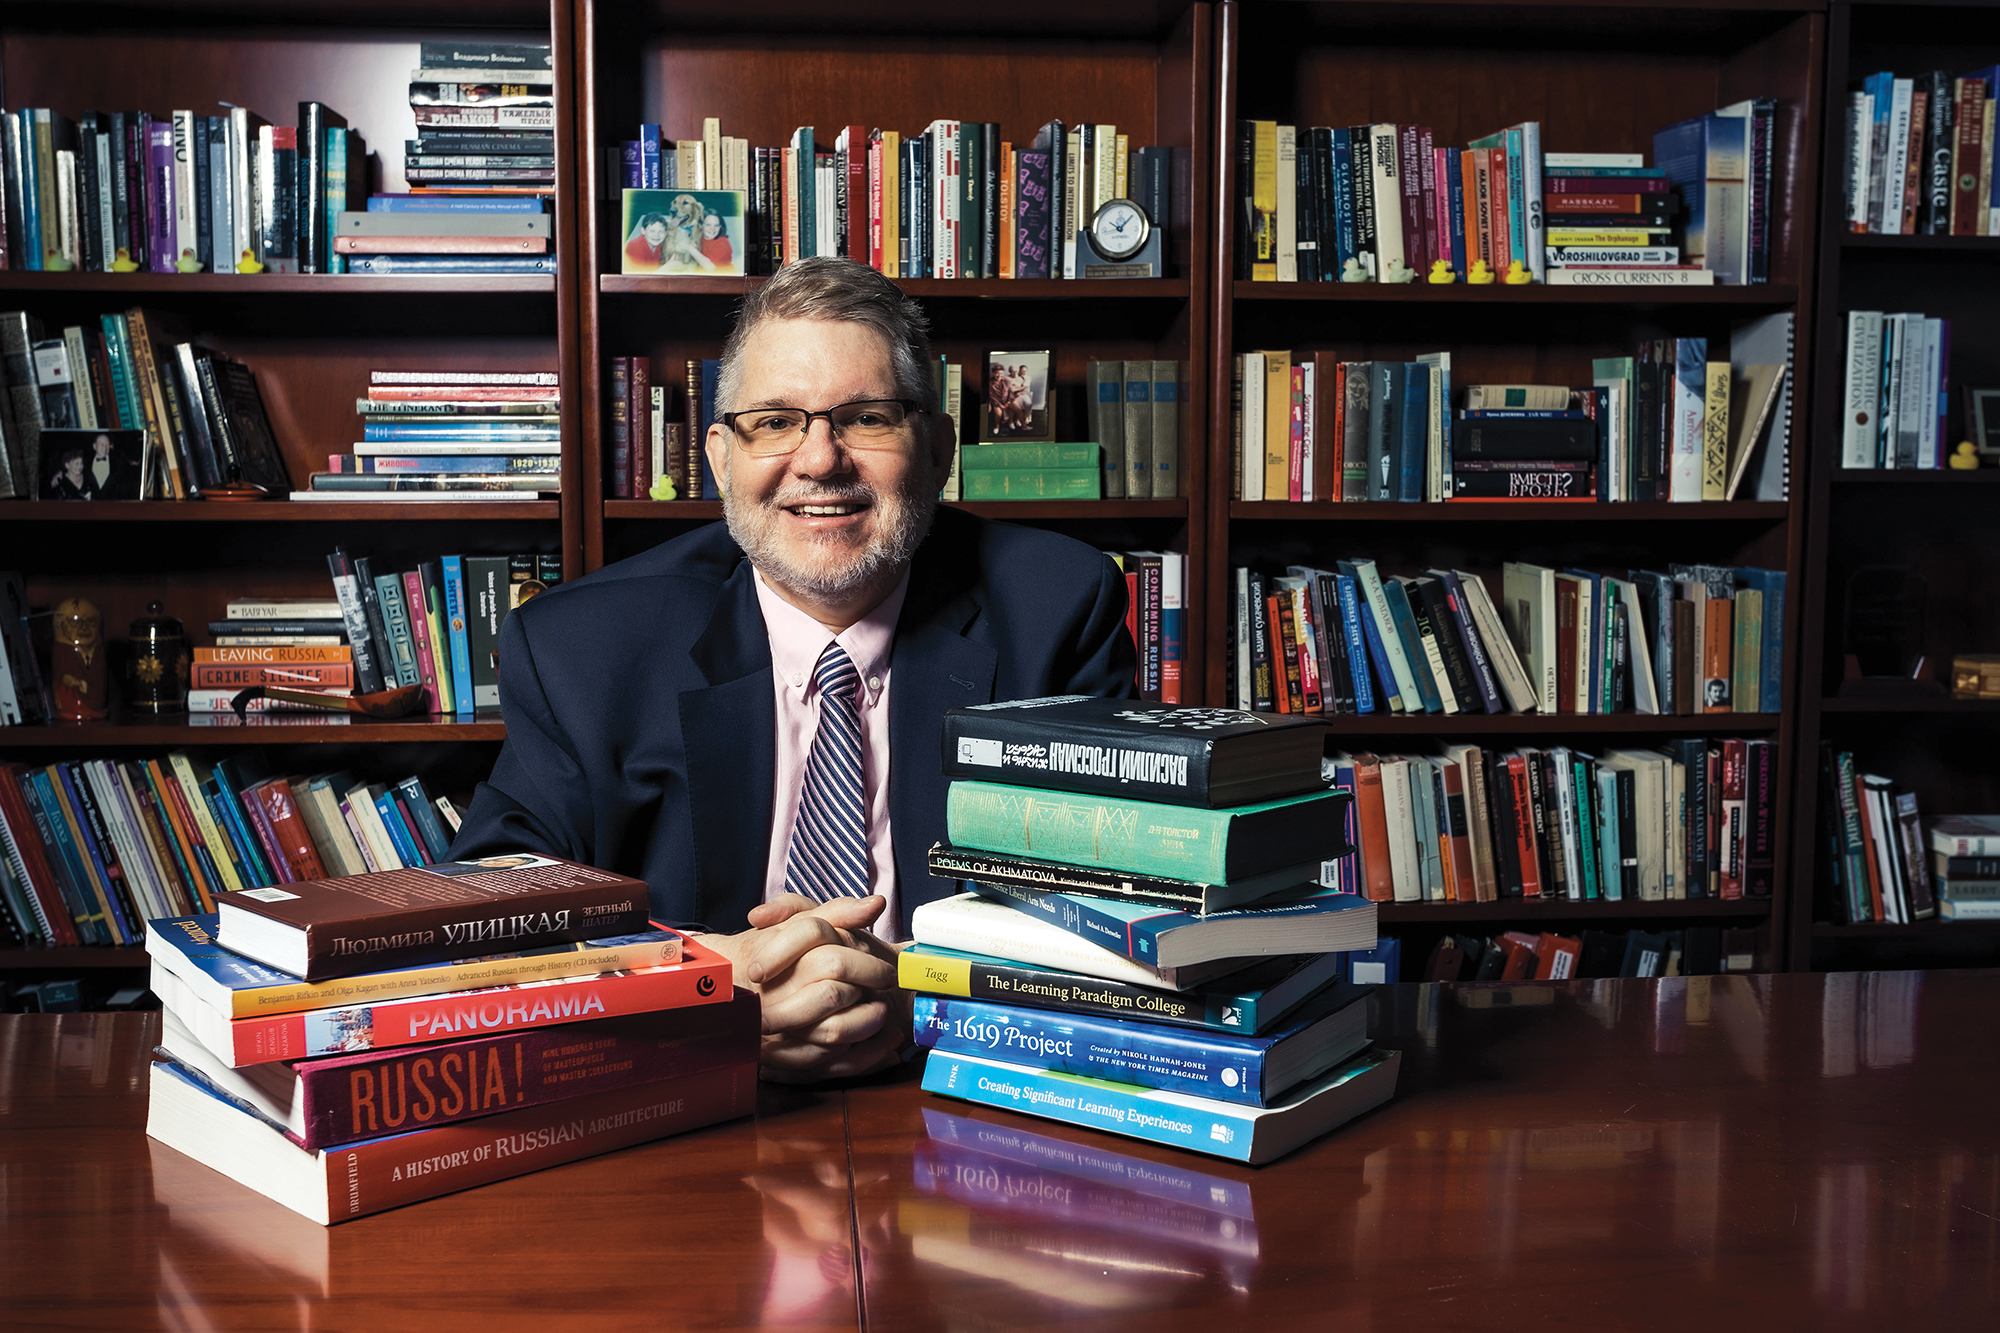 A man wearing glasses sits at a table with stacks of books on each side of him. Behind the man, a bookcase full of books spans the wall. 